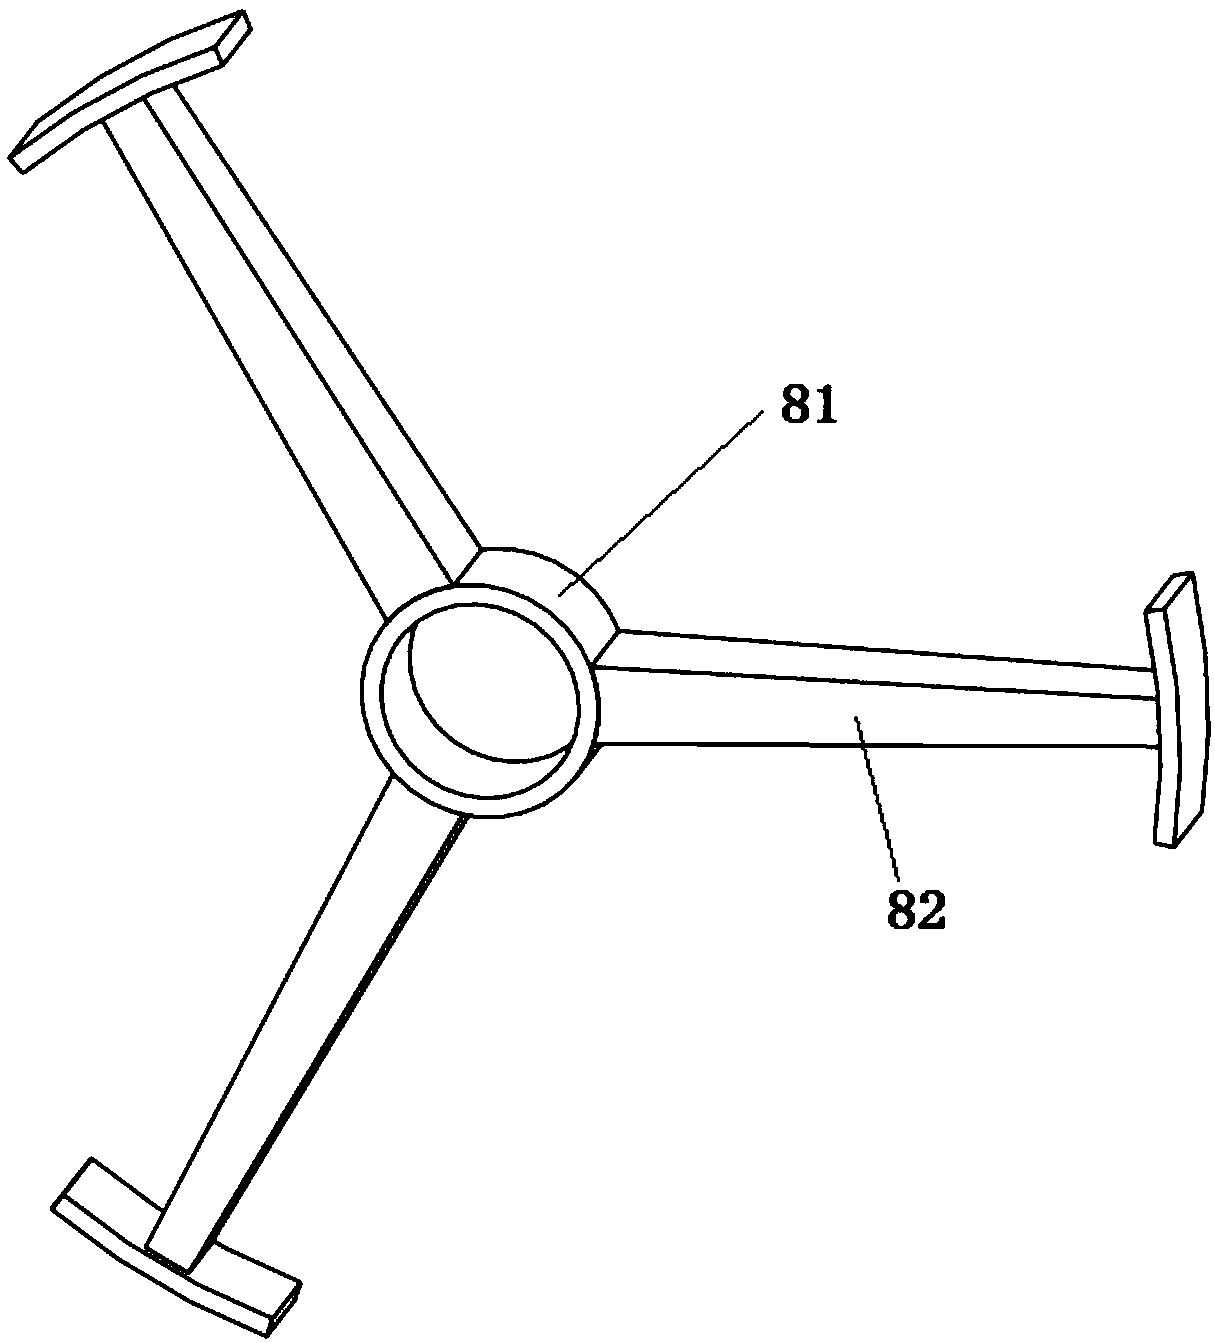 Knee joint passive reconstructable submissive constant force assisting device